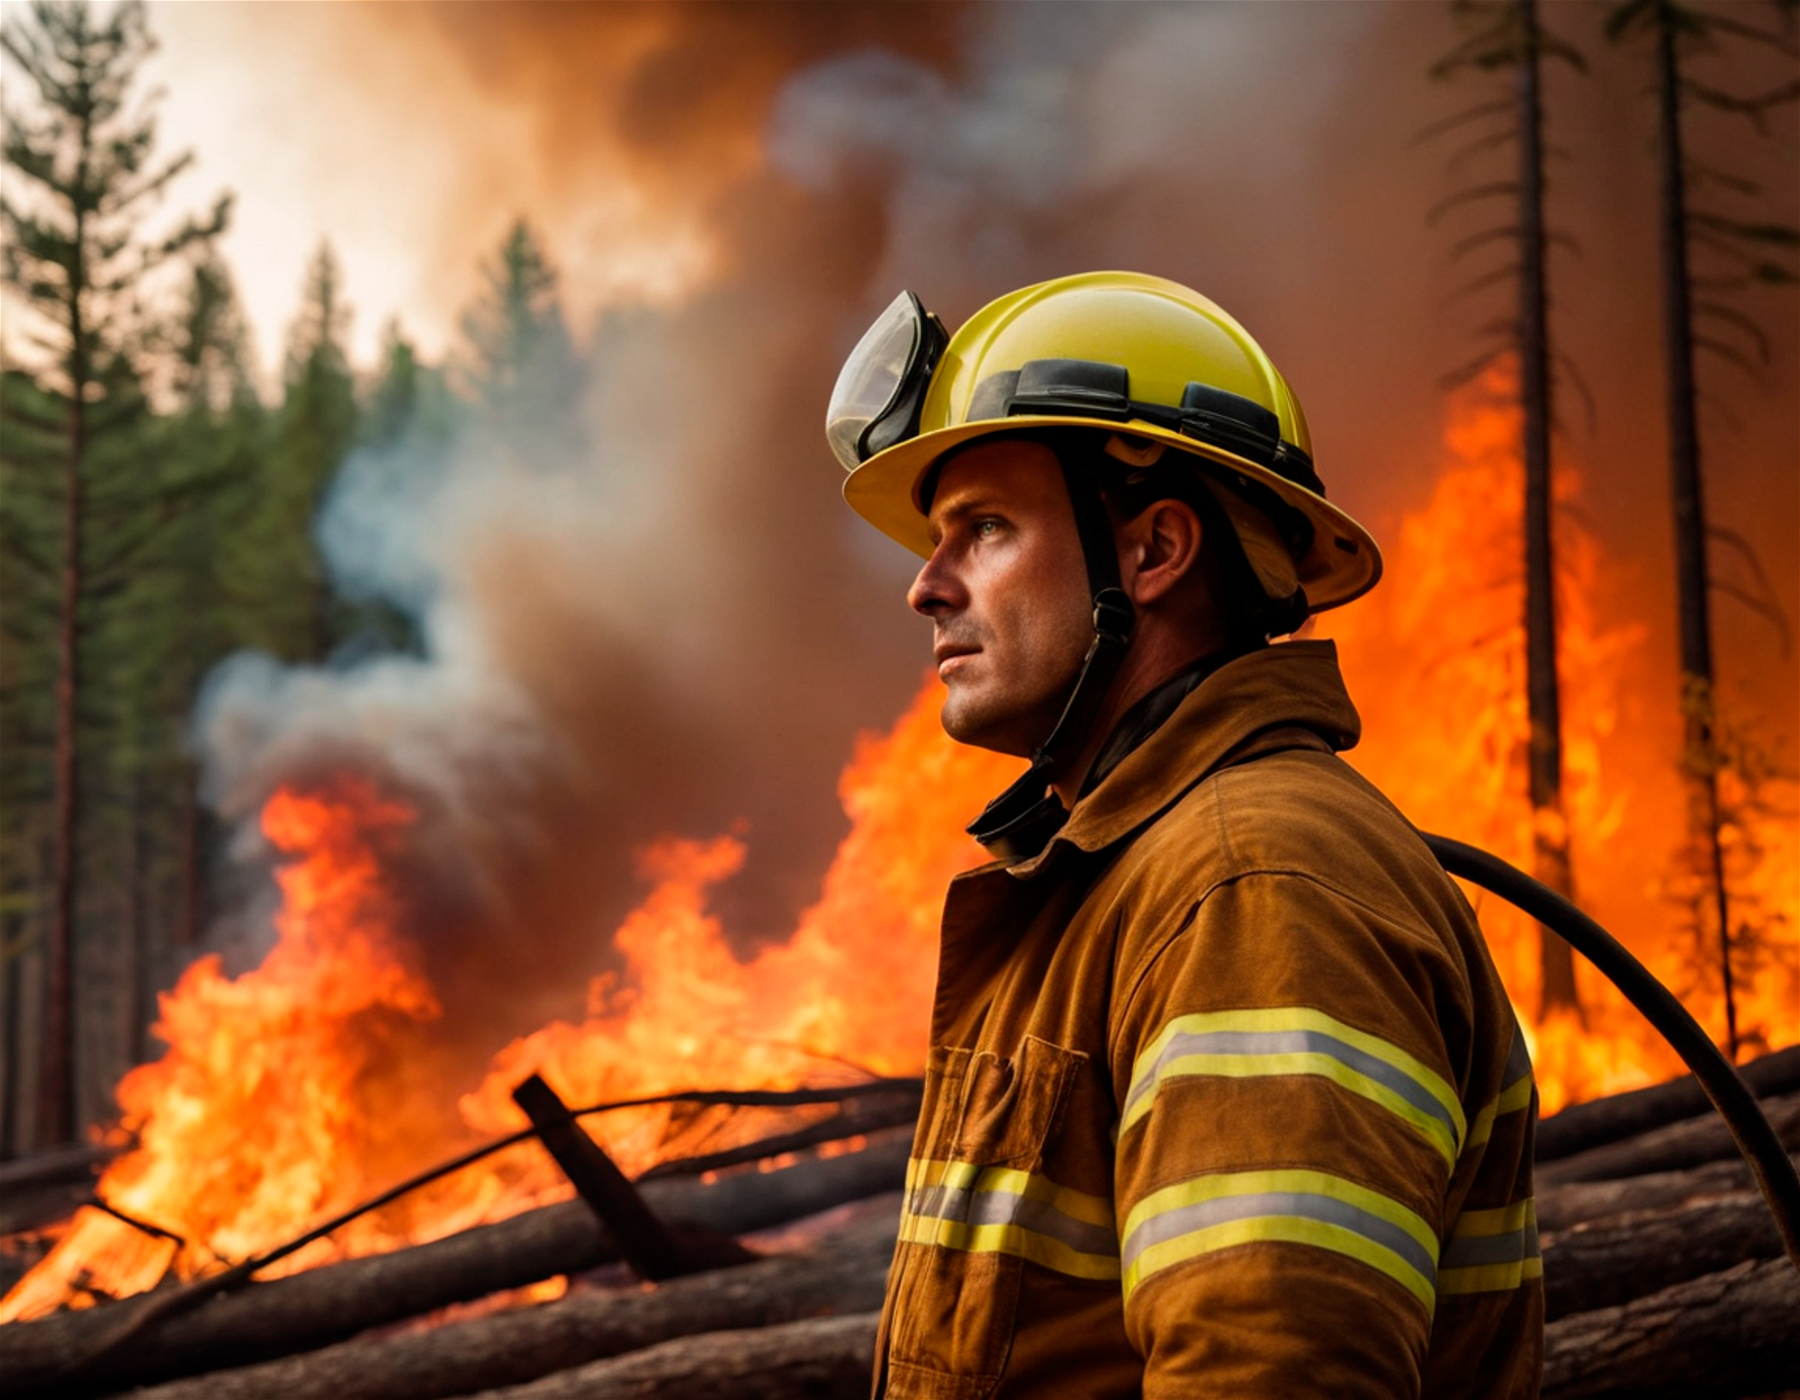 Exhausted firefighter in front of a forest fire